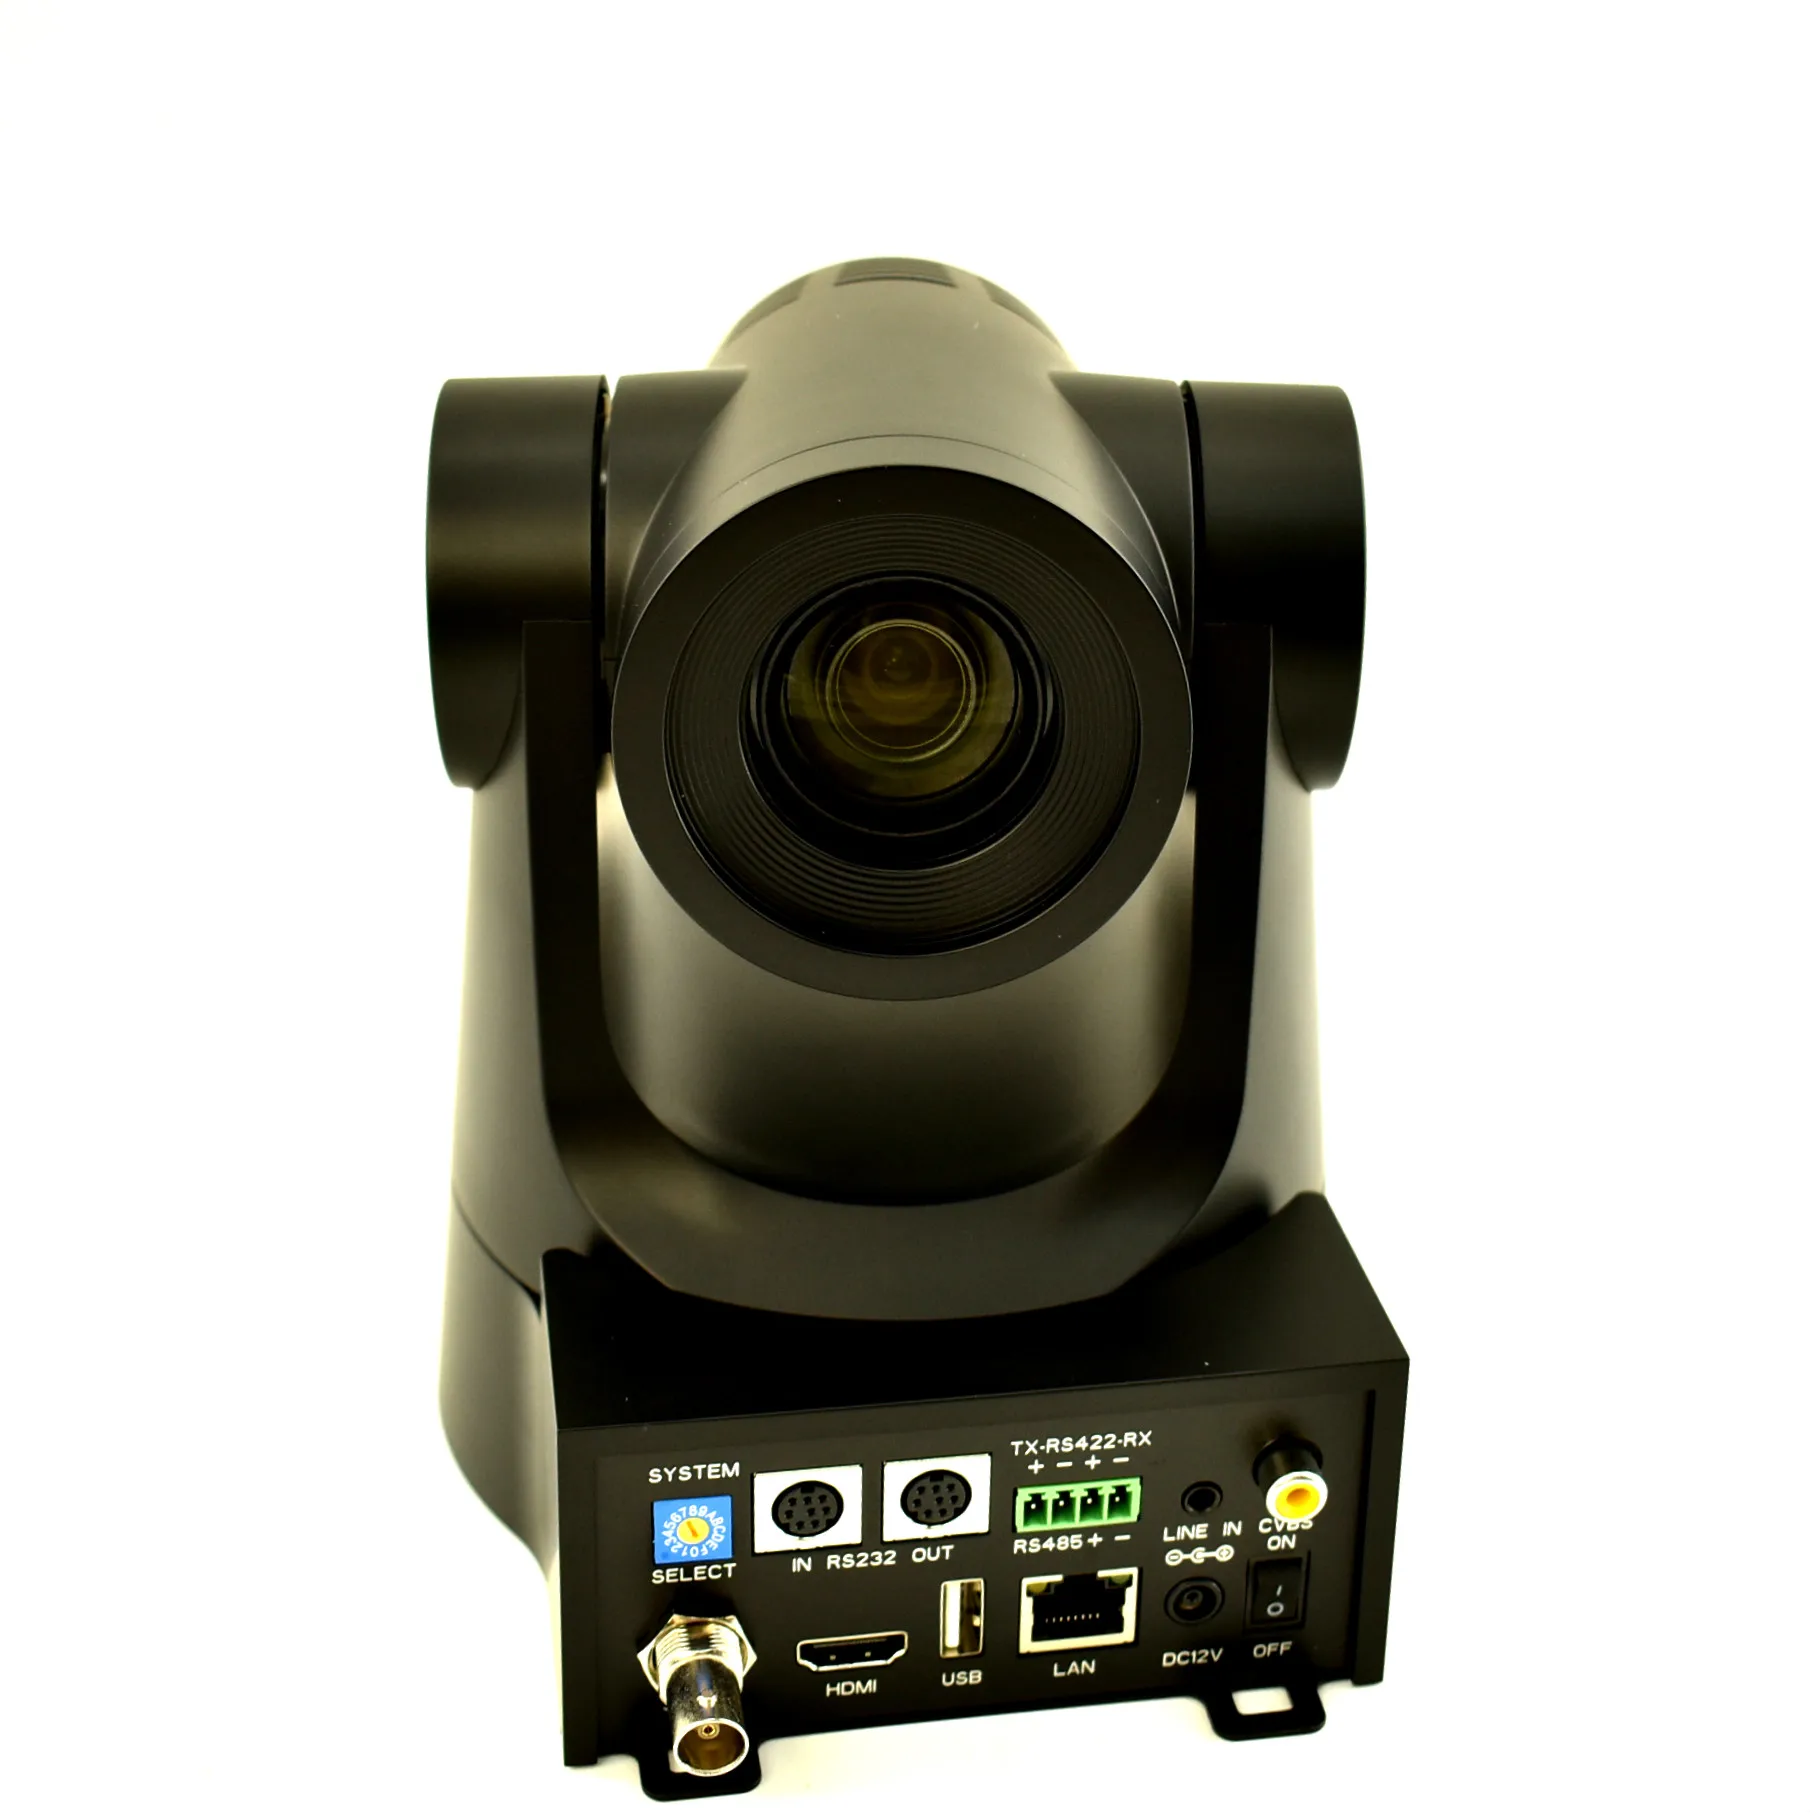 

20x Zoom 1080p USB PTZ Video Conference Camera or Broadcast Live Streaming Camera for Meeting Telemedicine Remote